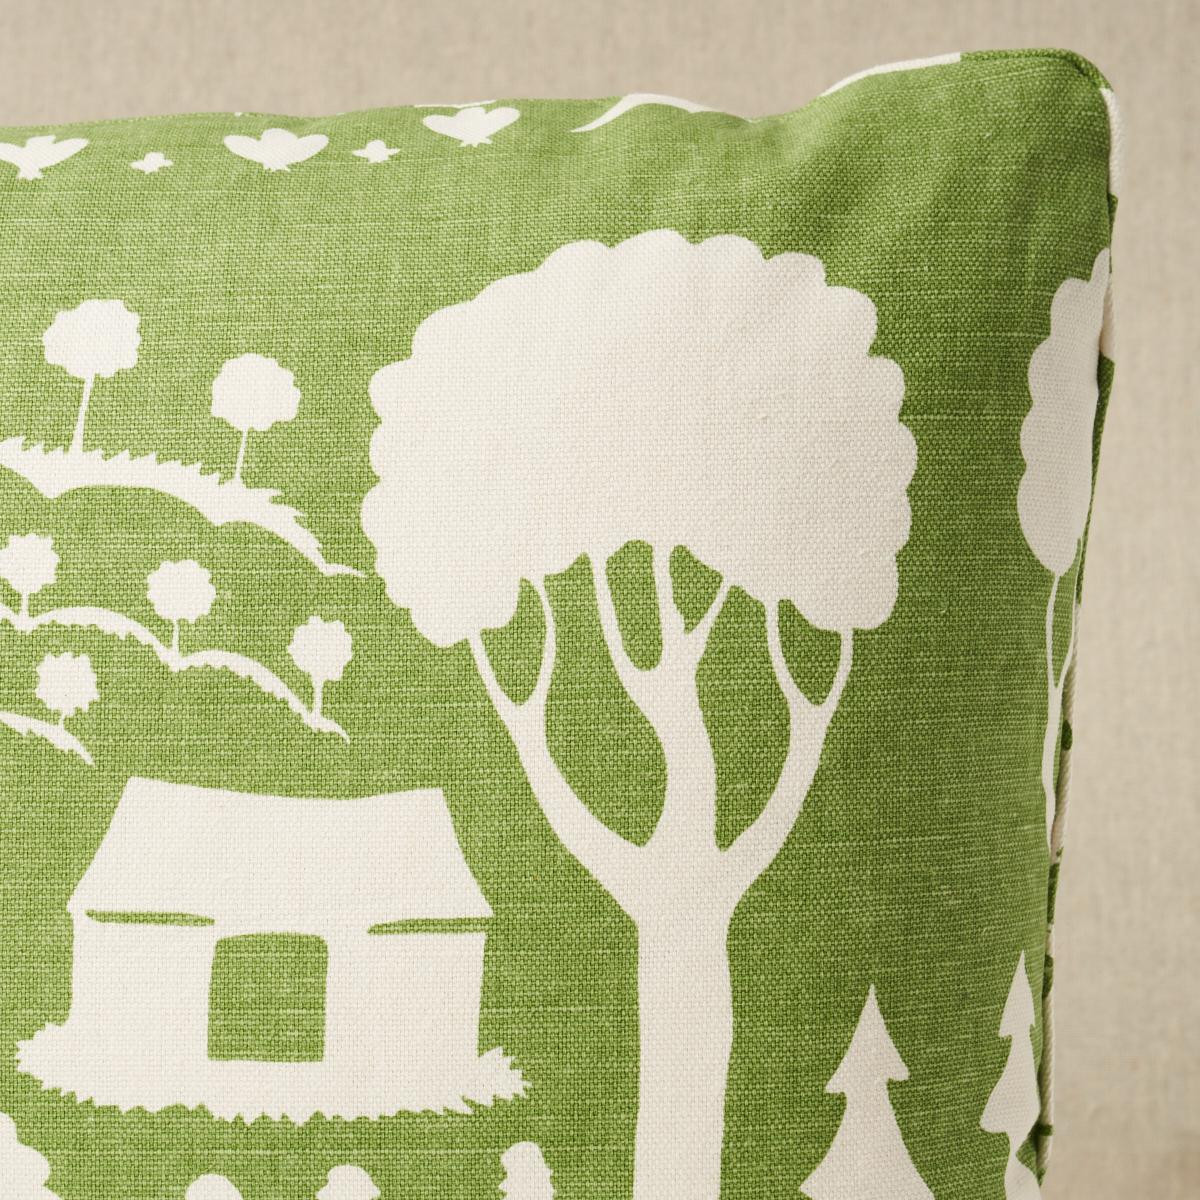 This pillow features Farm Scene with a self welt finish. Inspired by a midcentury design in our archive, Farm Scene in green is a cheerful, charming celebration of country life. A stylized silhouetted landscape, this animated mid-scale pattern has